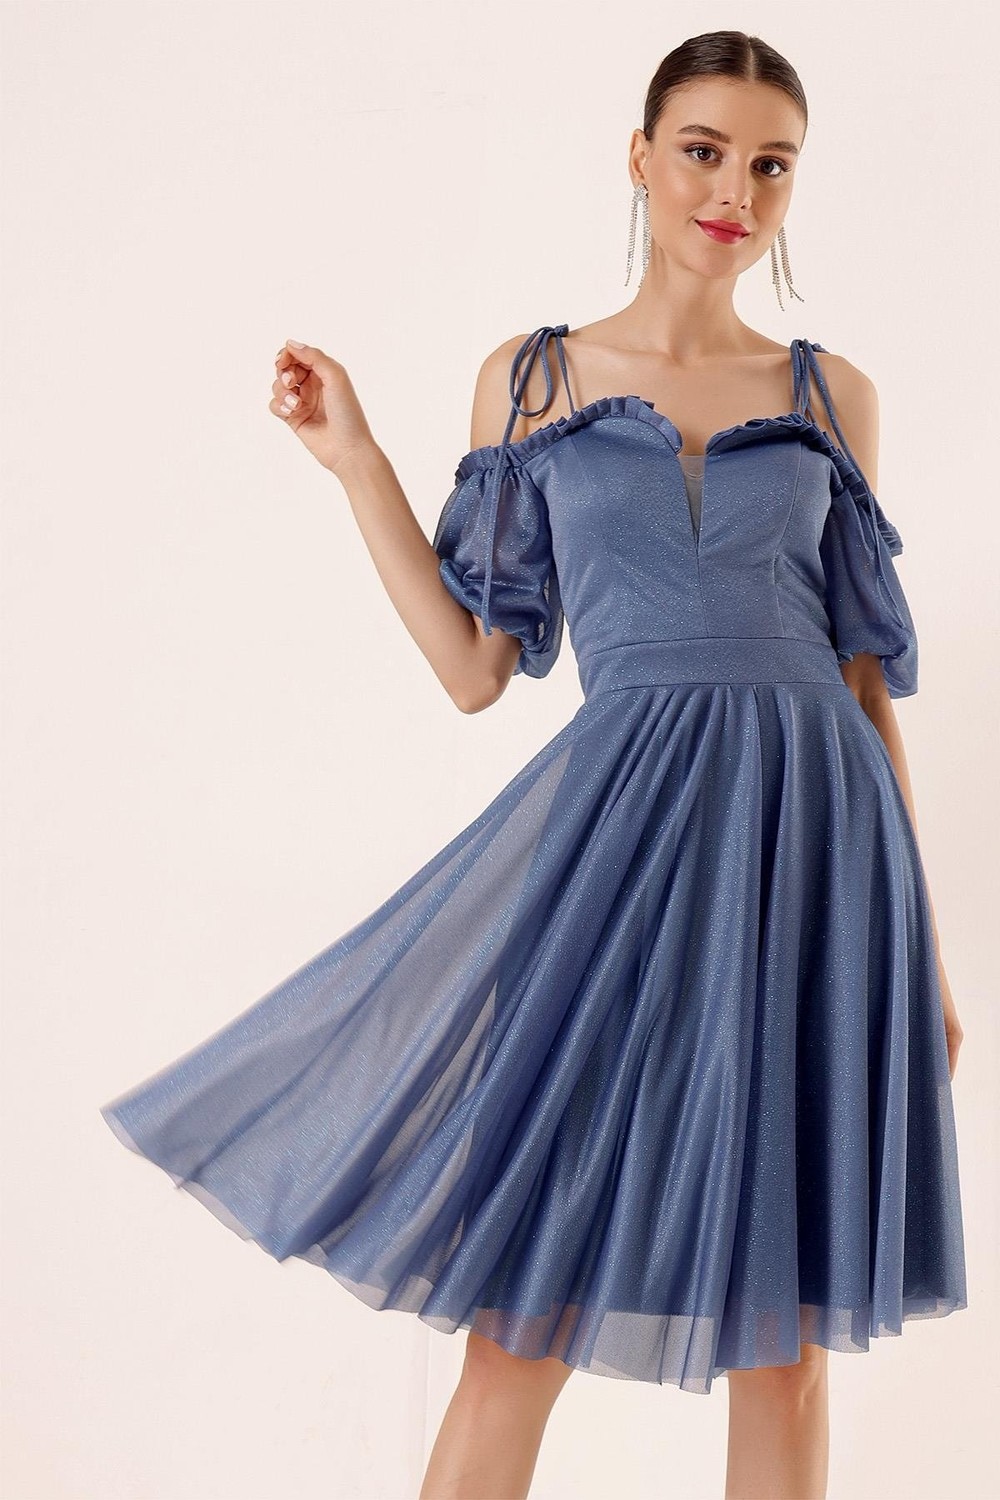 By Saygı Pleated Collar with Balloon Sleeves, Lined Silvery Tulle Dress Indigo.